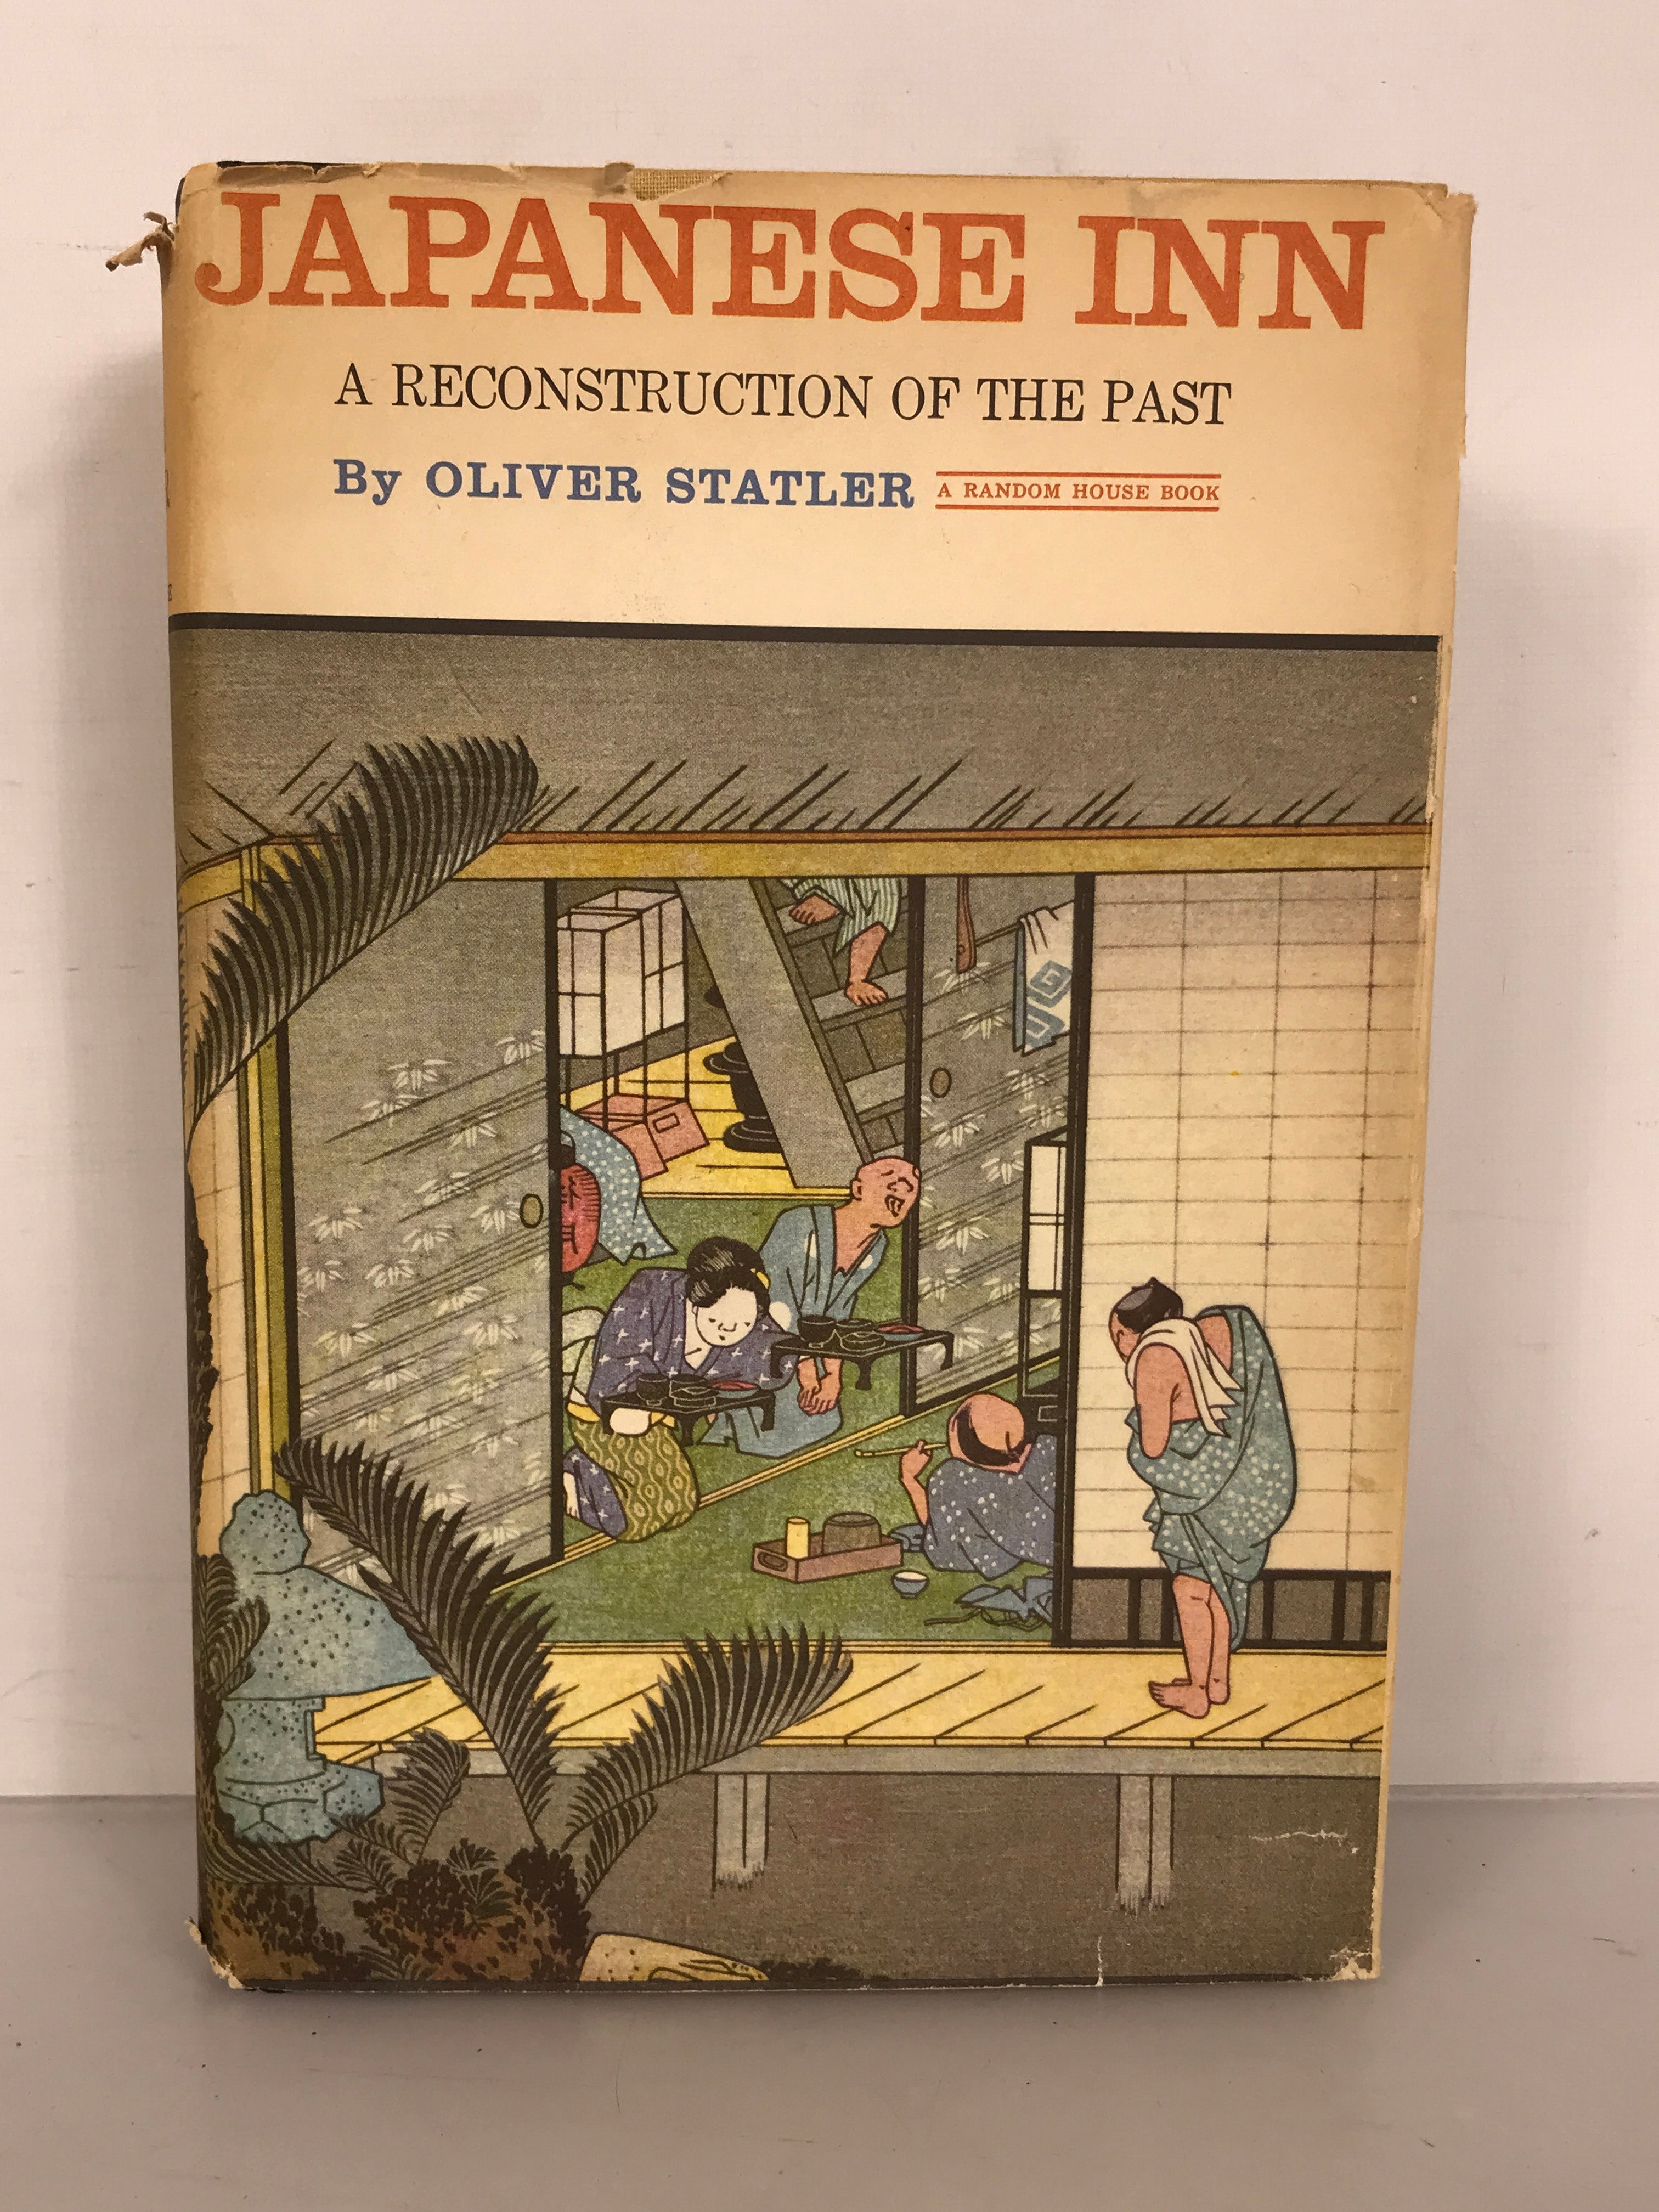 Japanese Inn A Reconstruction of the Past by Oliver Statler 1961 HC DJ